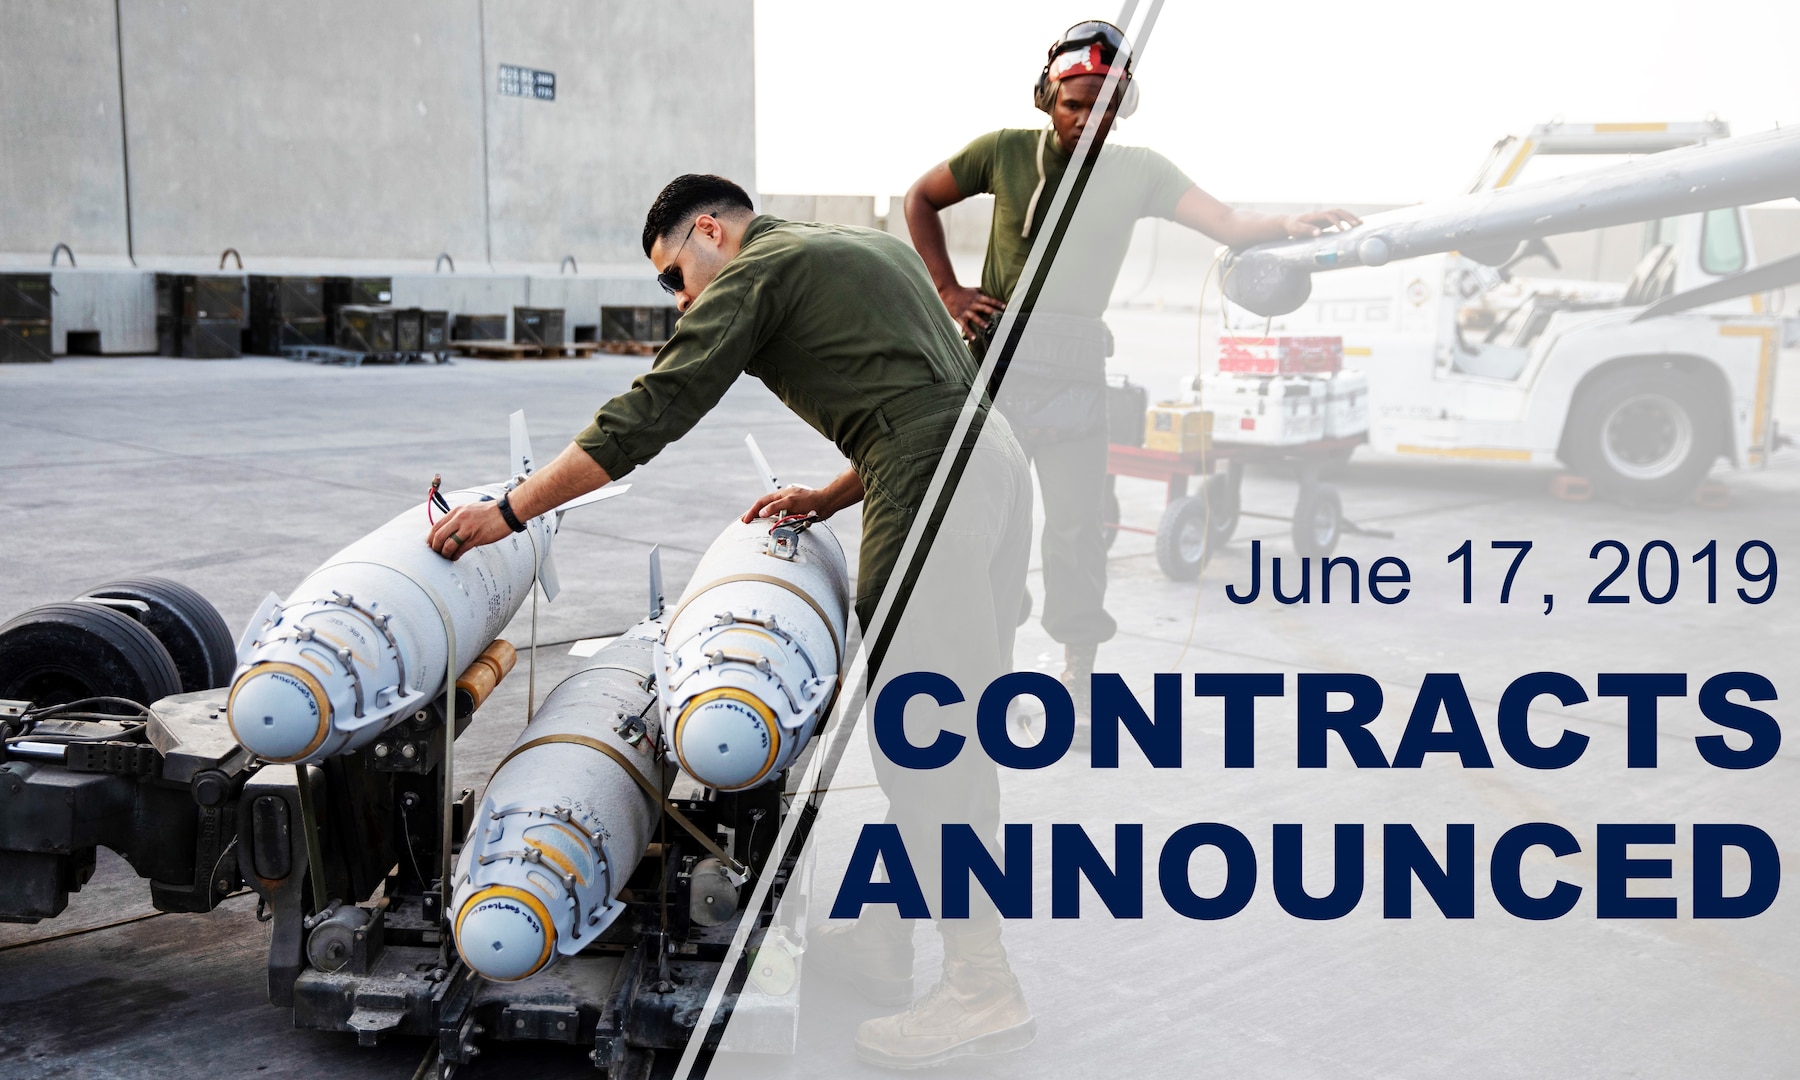 Two service members observe three missiles sitting on a transport crate. Words over photo reads: "June 17, 2019 Contracts Announced."